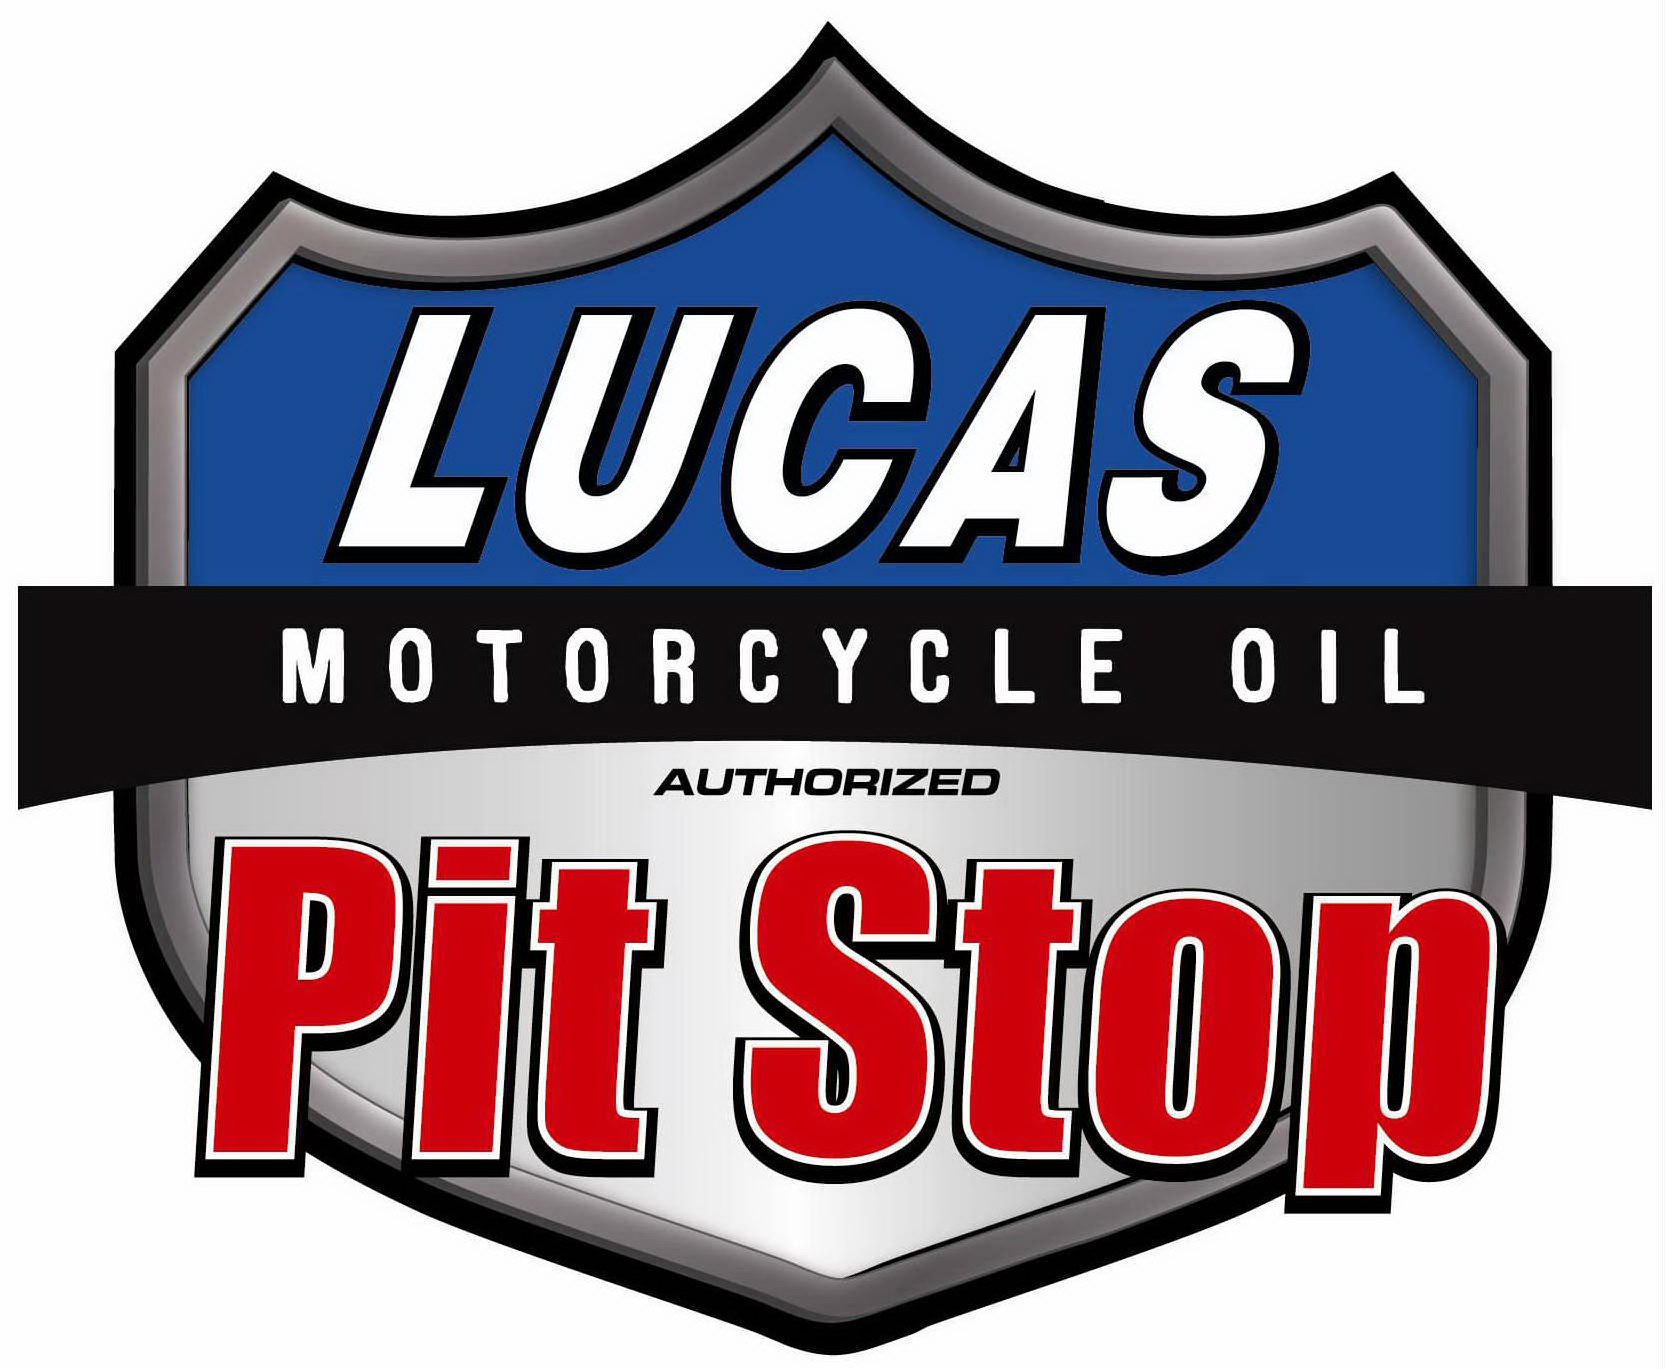  LUCAS MOTORCYCLE OIL AUTHORIZED PIT STOP